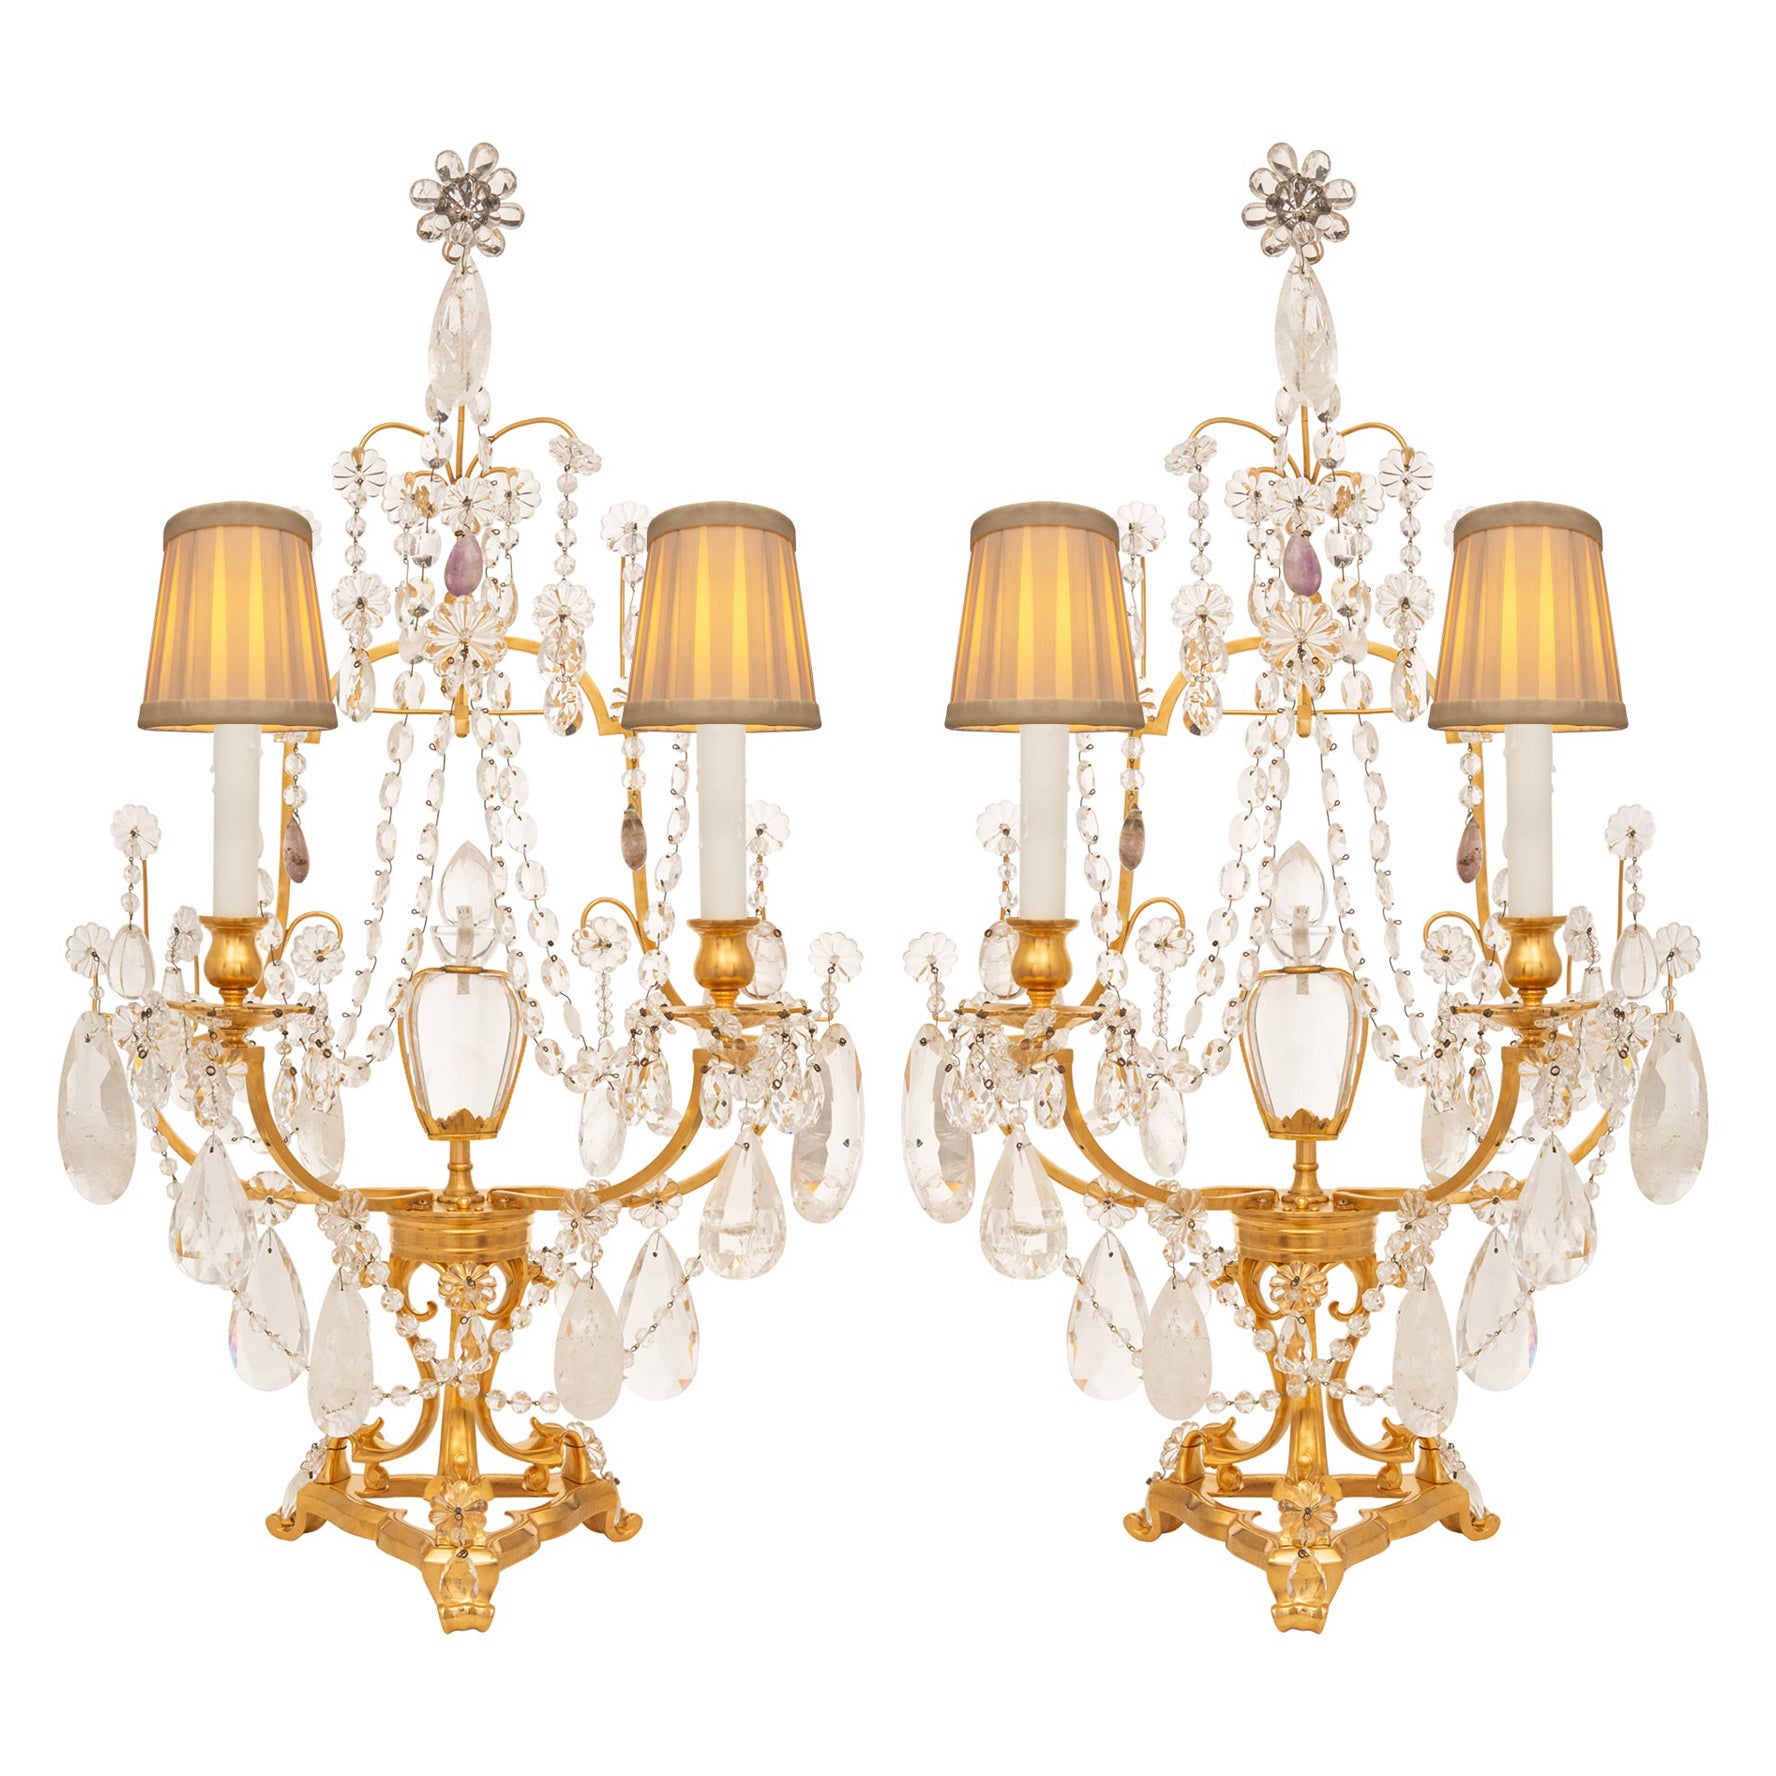 Pair Of French 19th Century Louis XVI St. Rock Crystal & Ormolu Girondoles Lamp For Sale